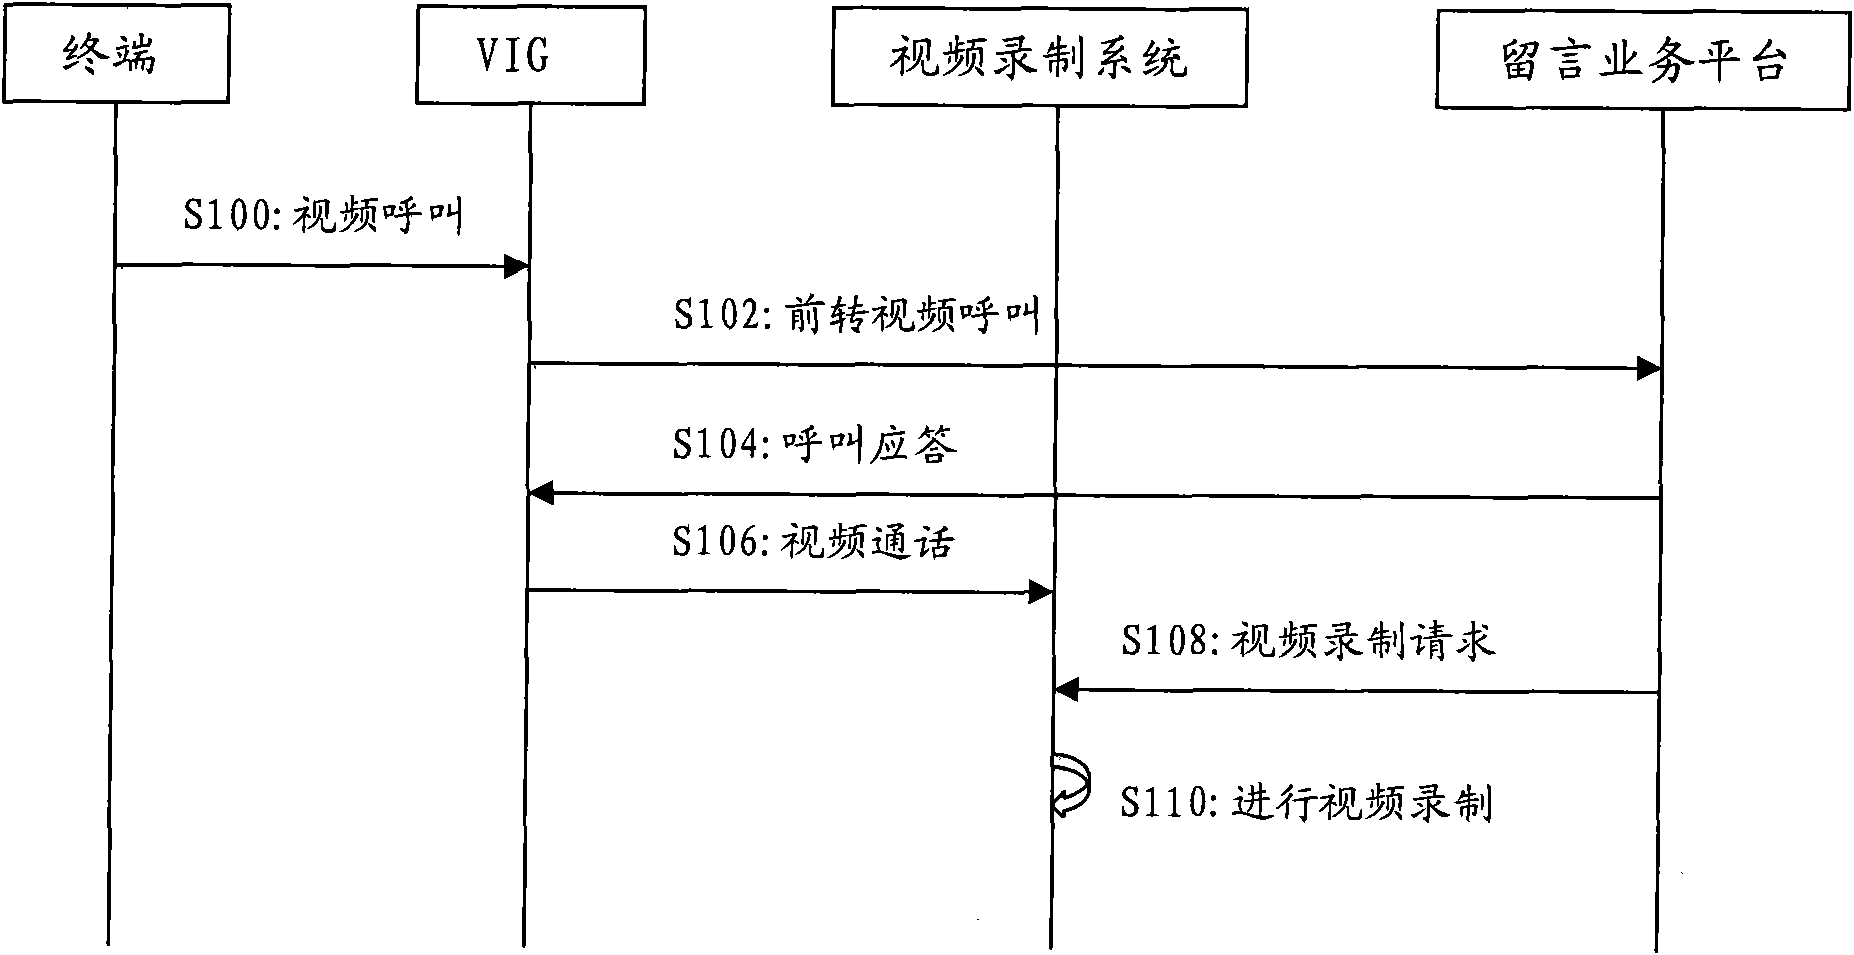 Video recording method, device and system